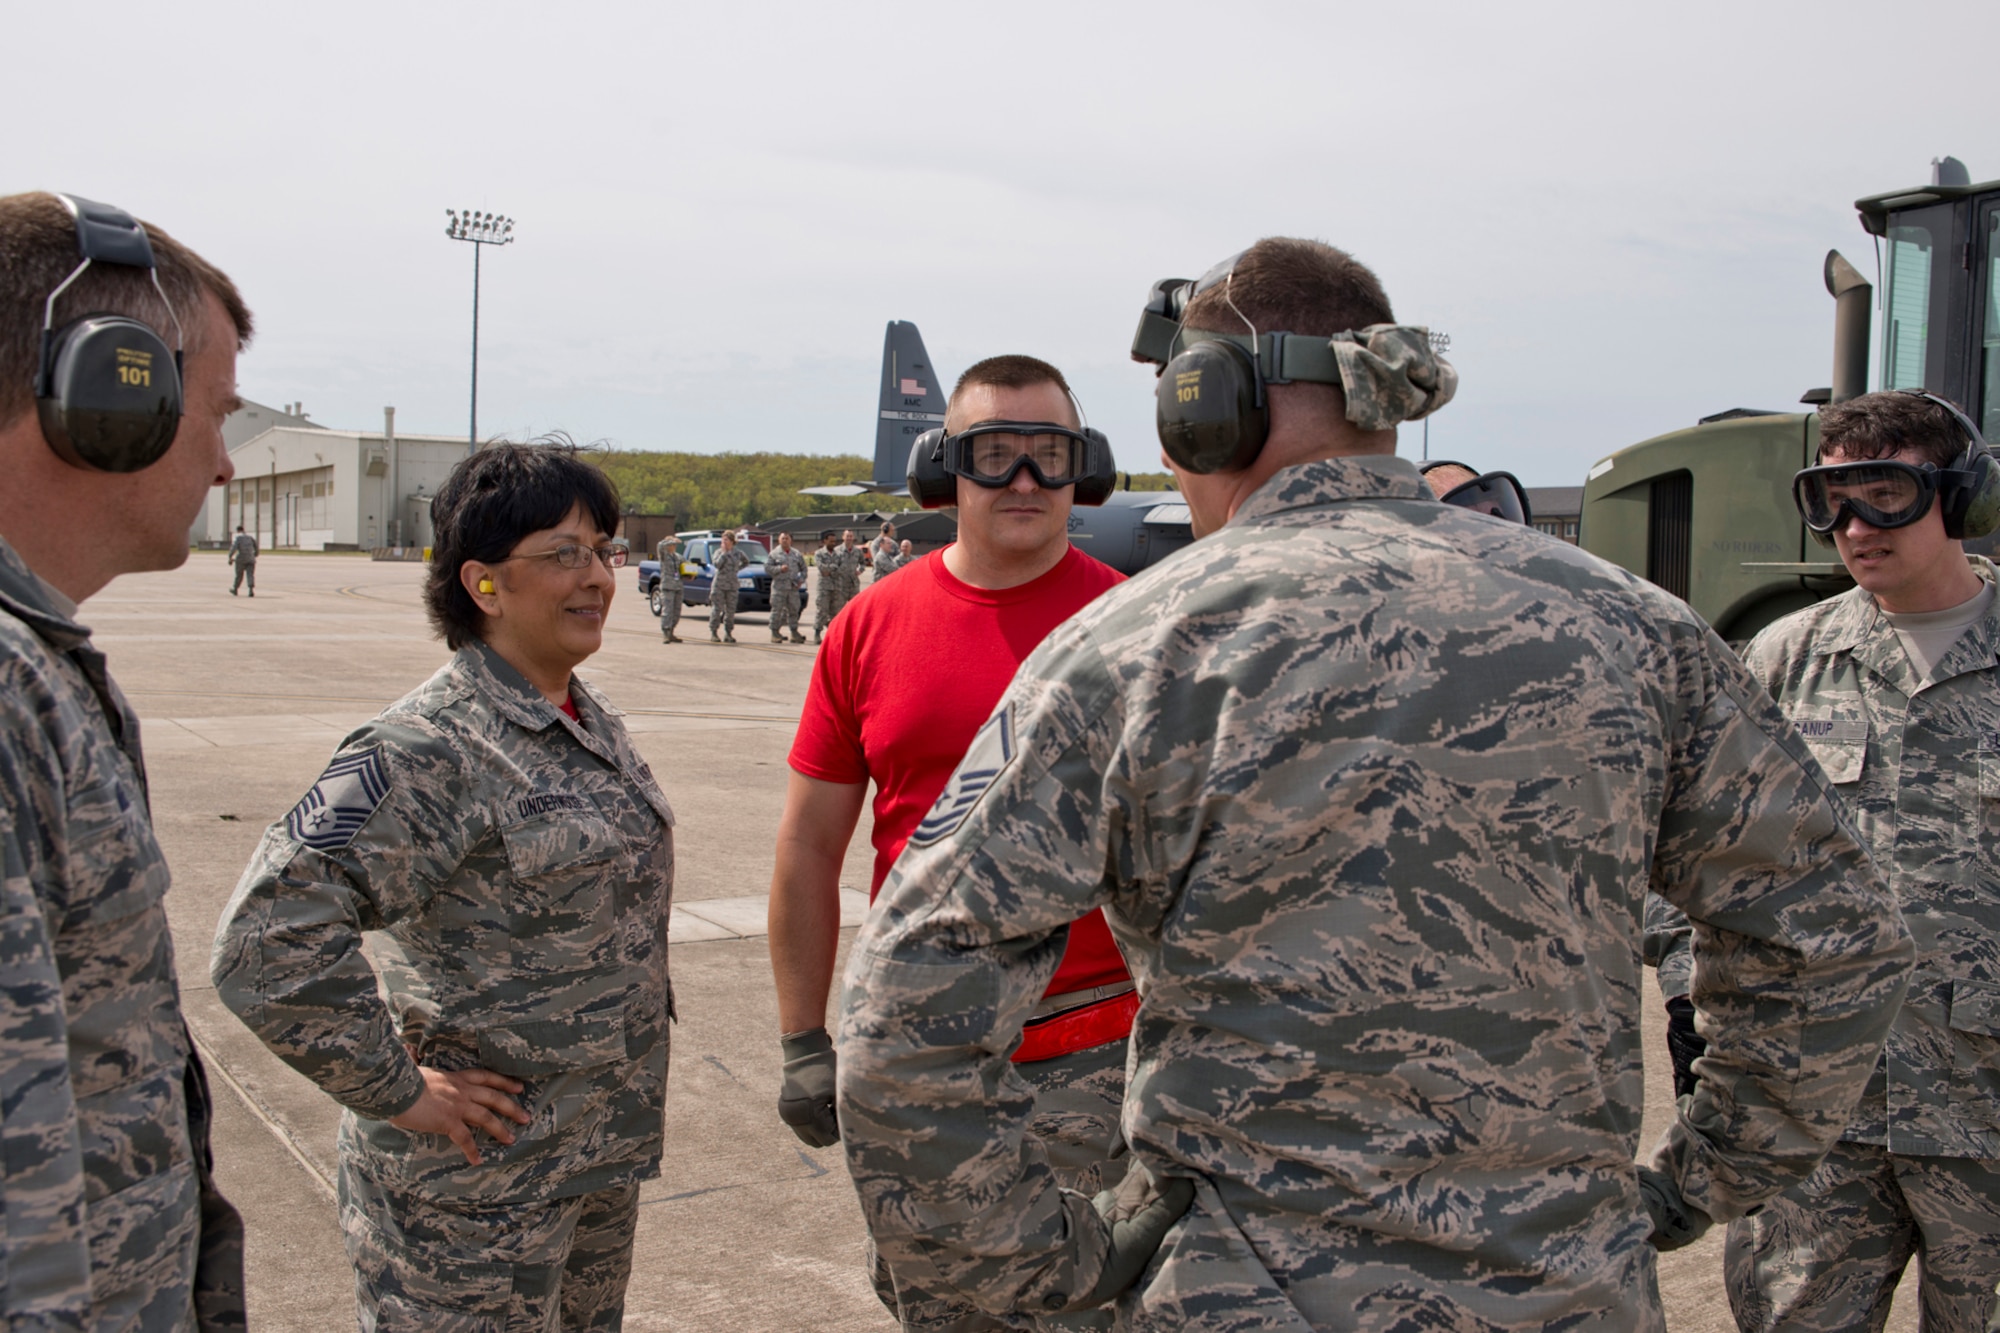 U.S. Air Force Reserve Chief Master Sgt. Cynthia Underwood, the 96th Aerial Port Squadron superintendent, receives a quick briefing after a training exercise April 2, 2017, at Little Rock Air Force Base, Ark. A 96 APS air transportation team is preparing to compete in the 2017 Port Dawg Challenge at Dobbins Air Reserve Base, Ga., and had just completed an Engines Running On-Load/Odd-Load of a C-130J Super Hercules as part of their groundwork for the event. The event was won by the 96 APS in 2012. (U.S. Air Force photo by Master Sgt. Jeff Walston/Released)